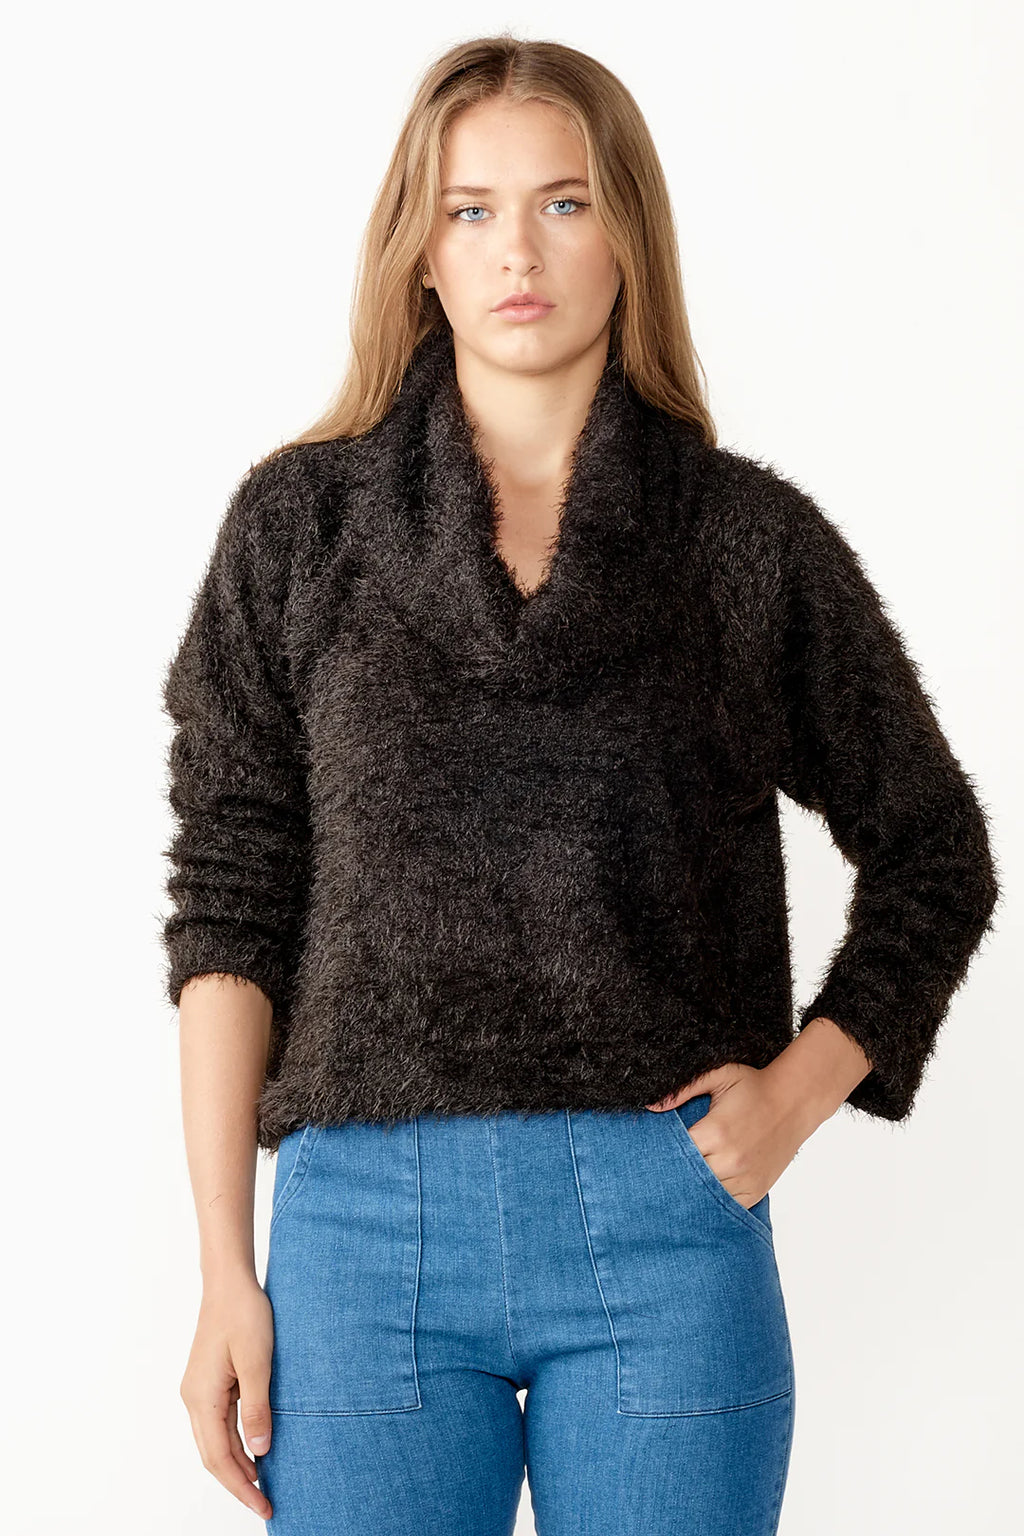 Cropped Cowl Neck Sweater SALE